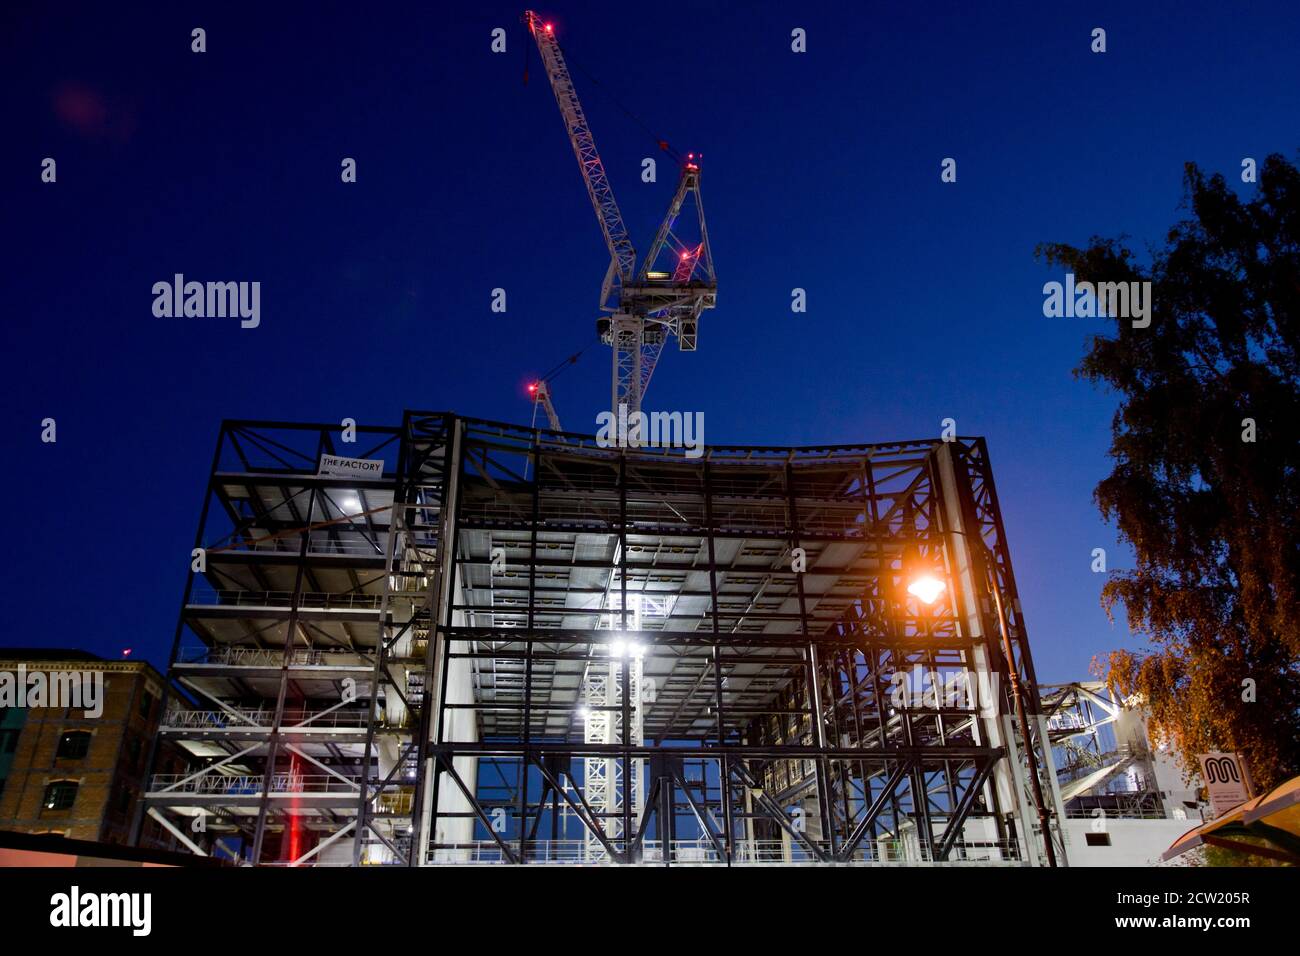 Building site lit up at night. Construction, cranes, new builds, gentrification, Manchester, girders, downtown, city centre, luxury flats, UK Stock Photo